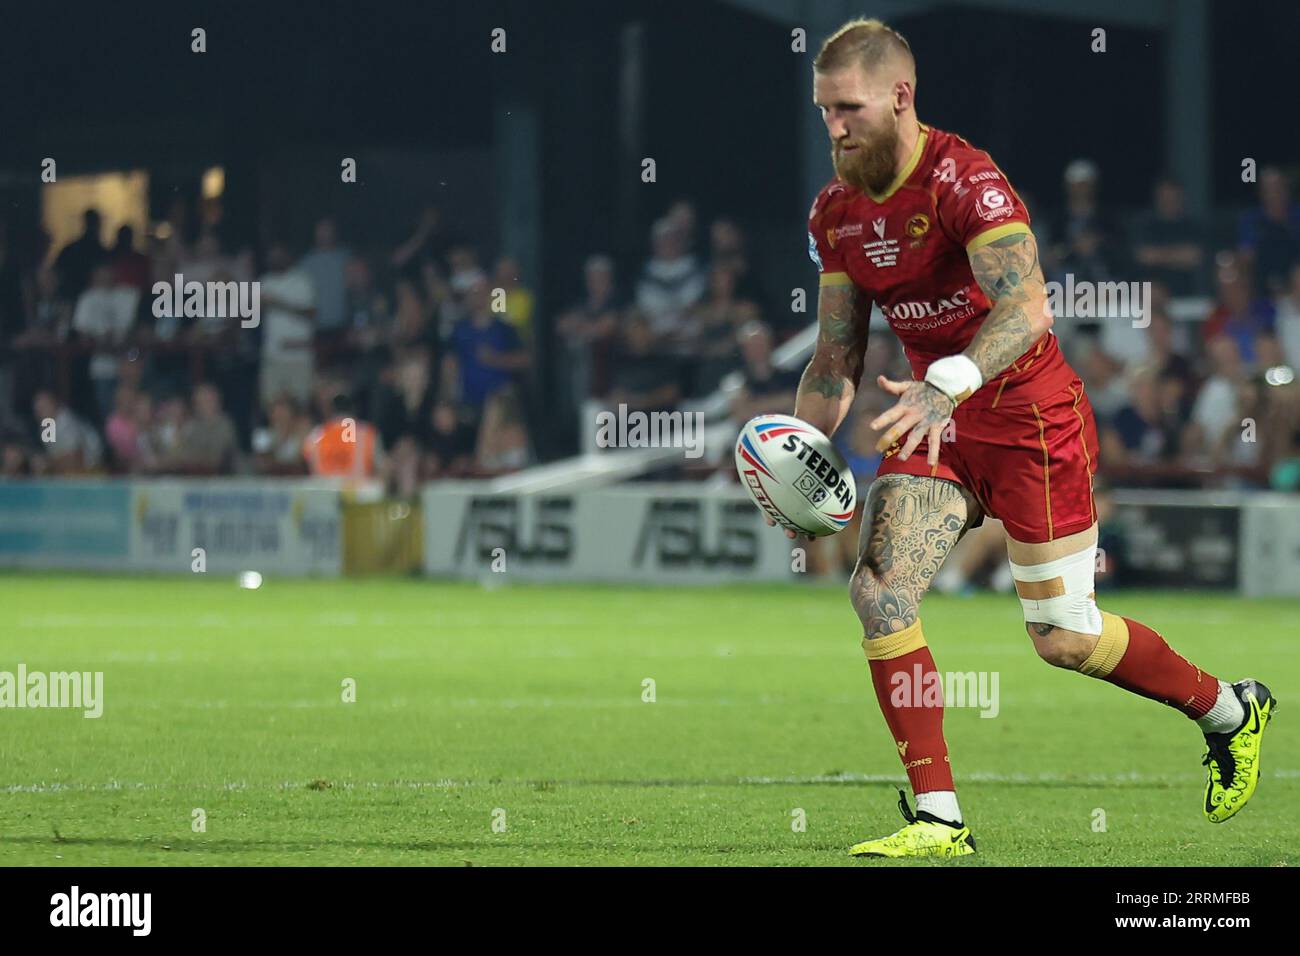 Wakefield, Royaume-Uni. 08 septembre 2023. Be Well support Stadium, Wakefield, West Yorkshire, 8 septembre 2023. Betfred Super League Wakefield Trinity vs Catalans Dragons Sam Tomkins de Catalans Dragons crédit : Touchlinepics/Alamy Live News Banque D'Images